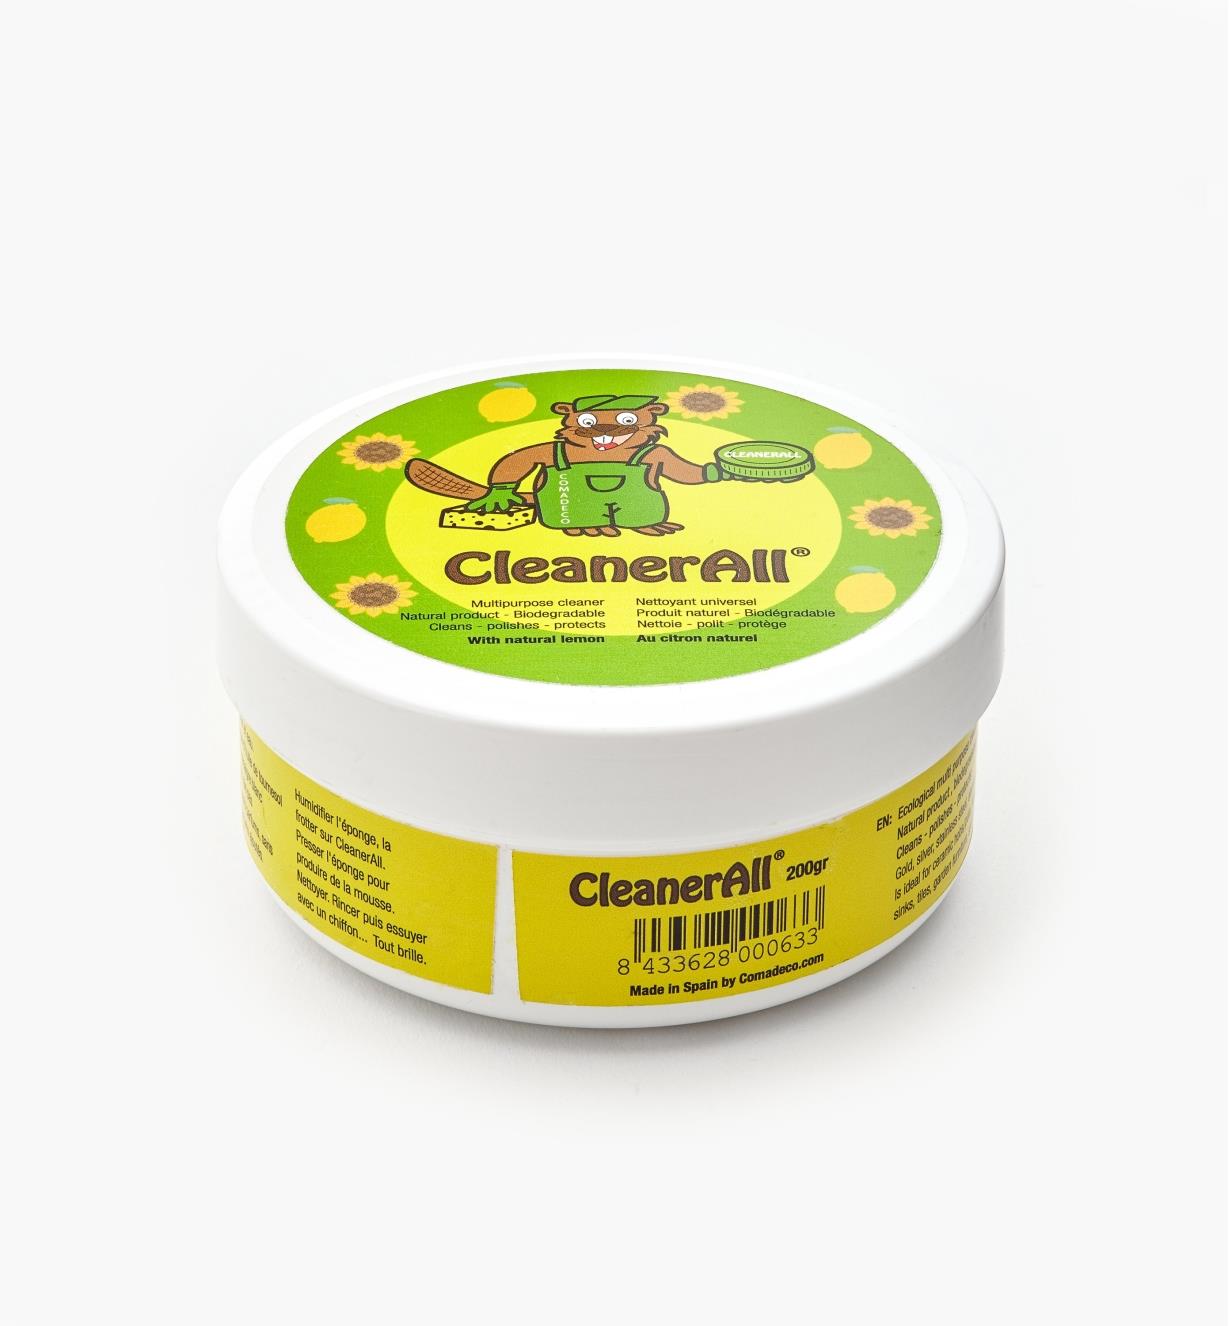 25K8035 - CleanerAll, 200g (7 oz)